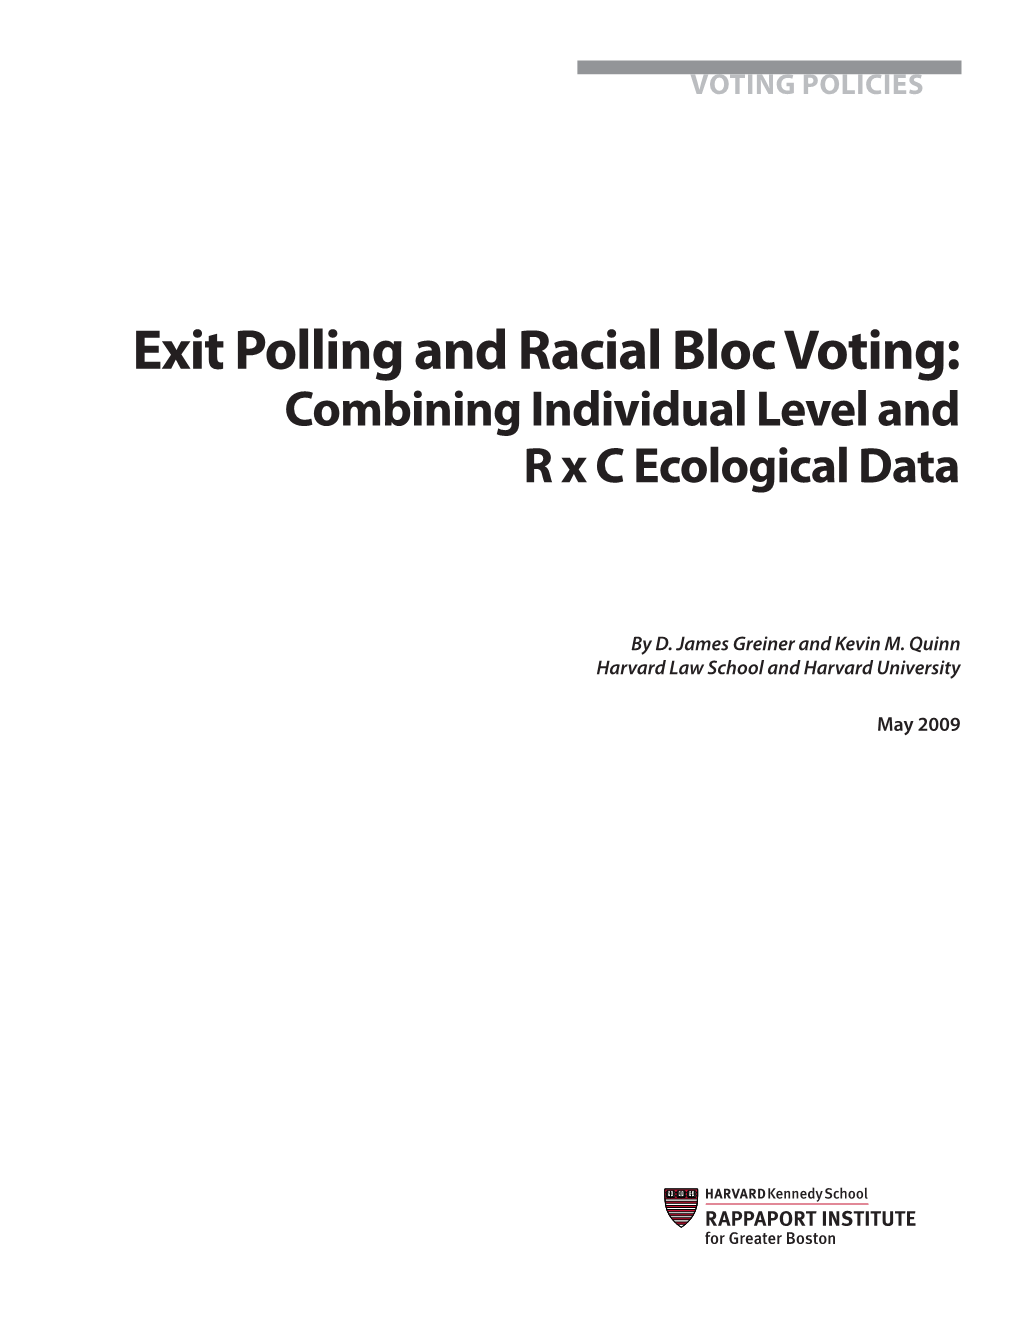 Exit Polling and Racial Bloc Voting: Combining Individual Level and R X C Ecological Data